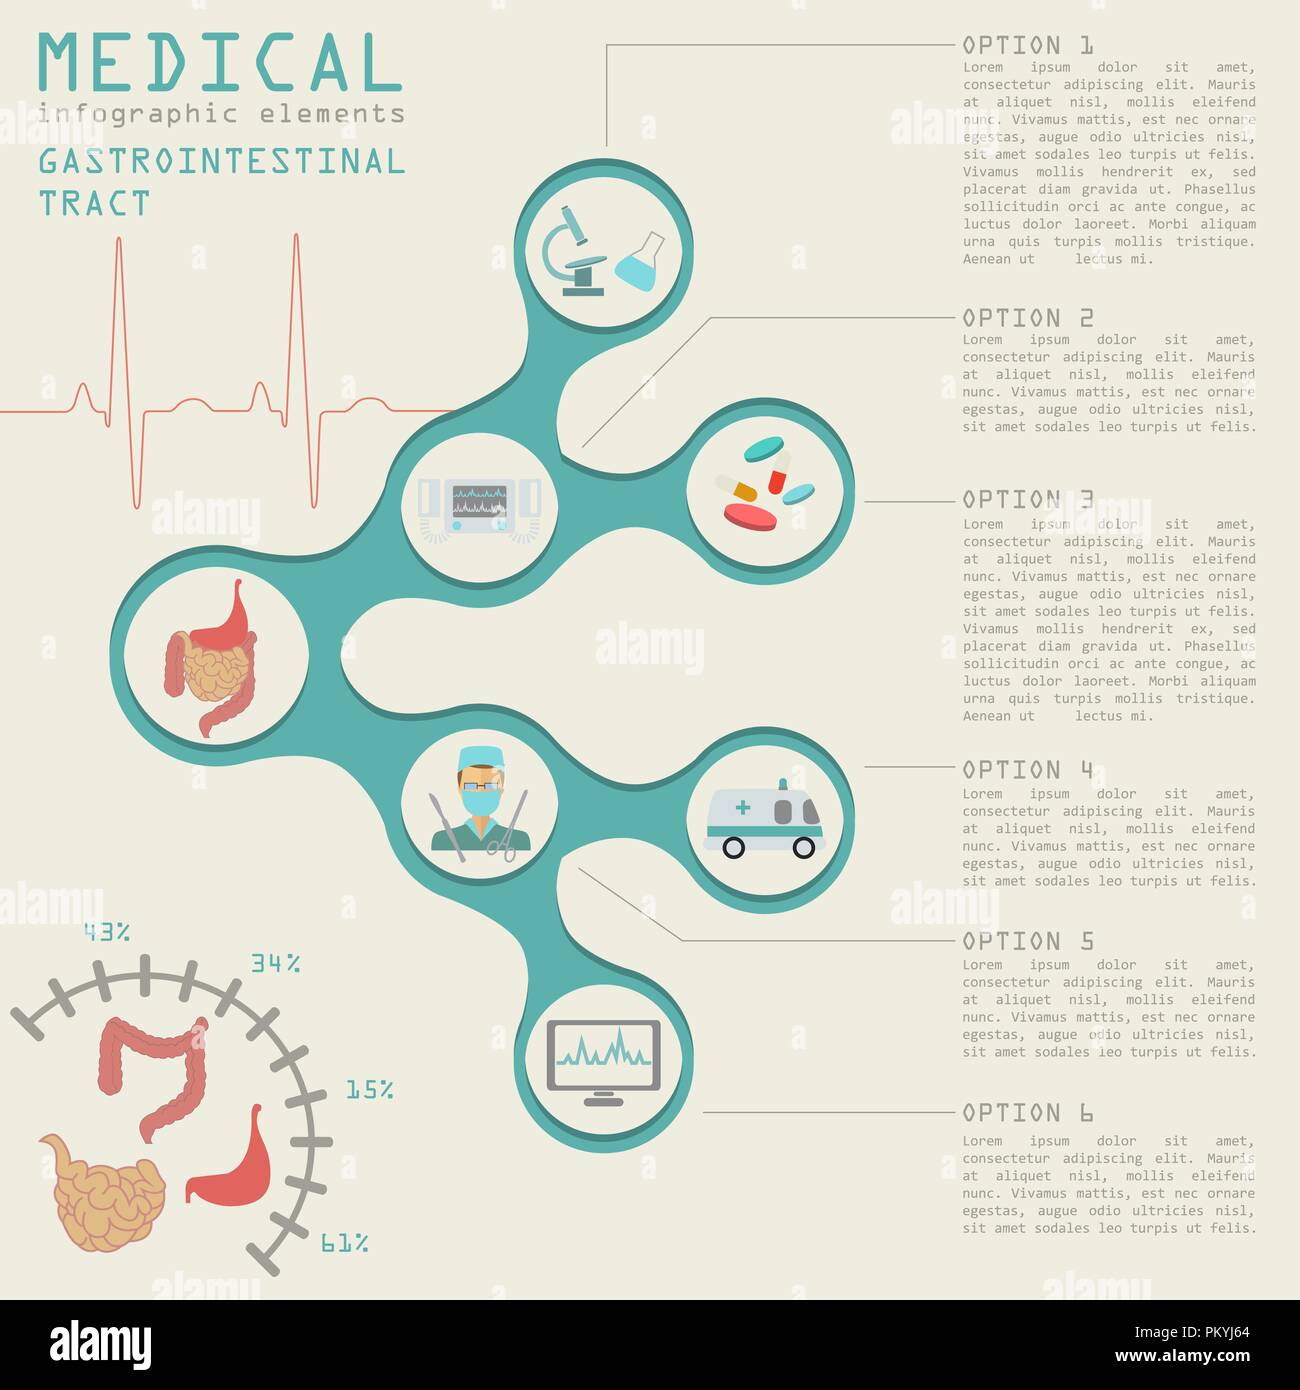 Medical ifographic design. Apparato digerente. Illustrazione Vettoriale Illustrazione Vettoriale